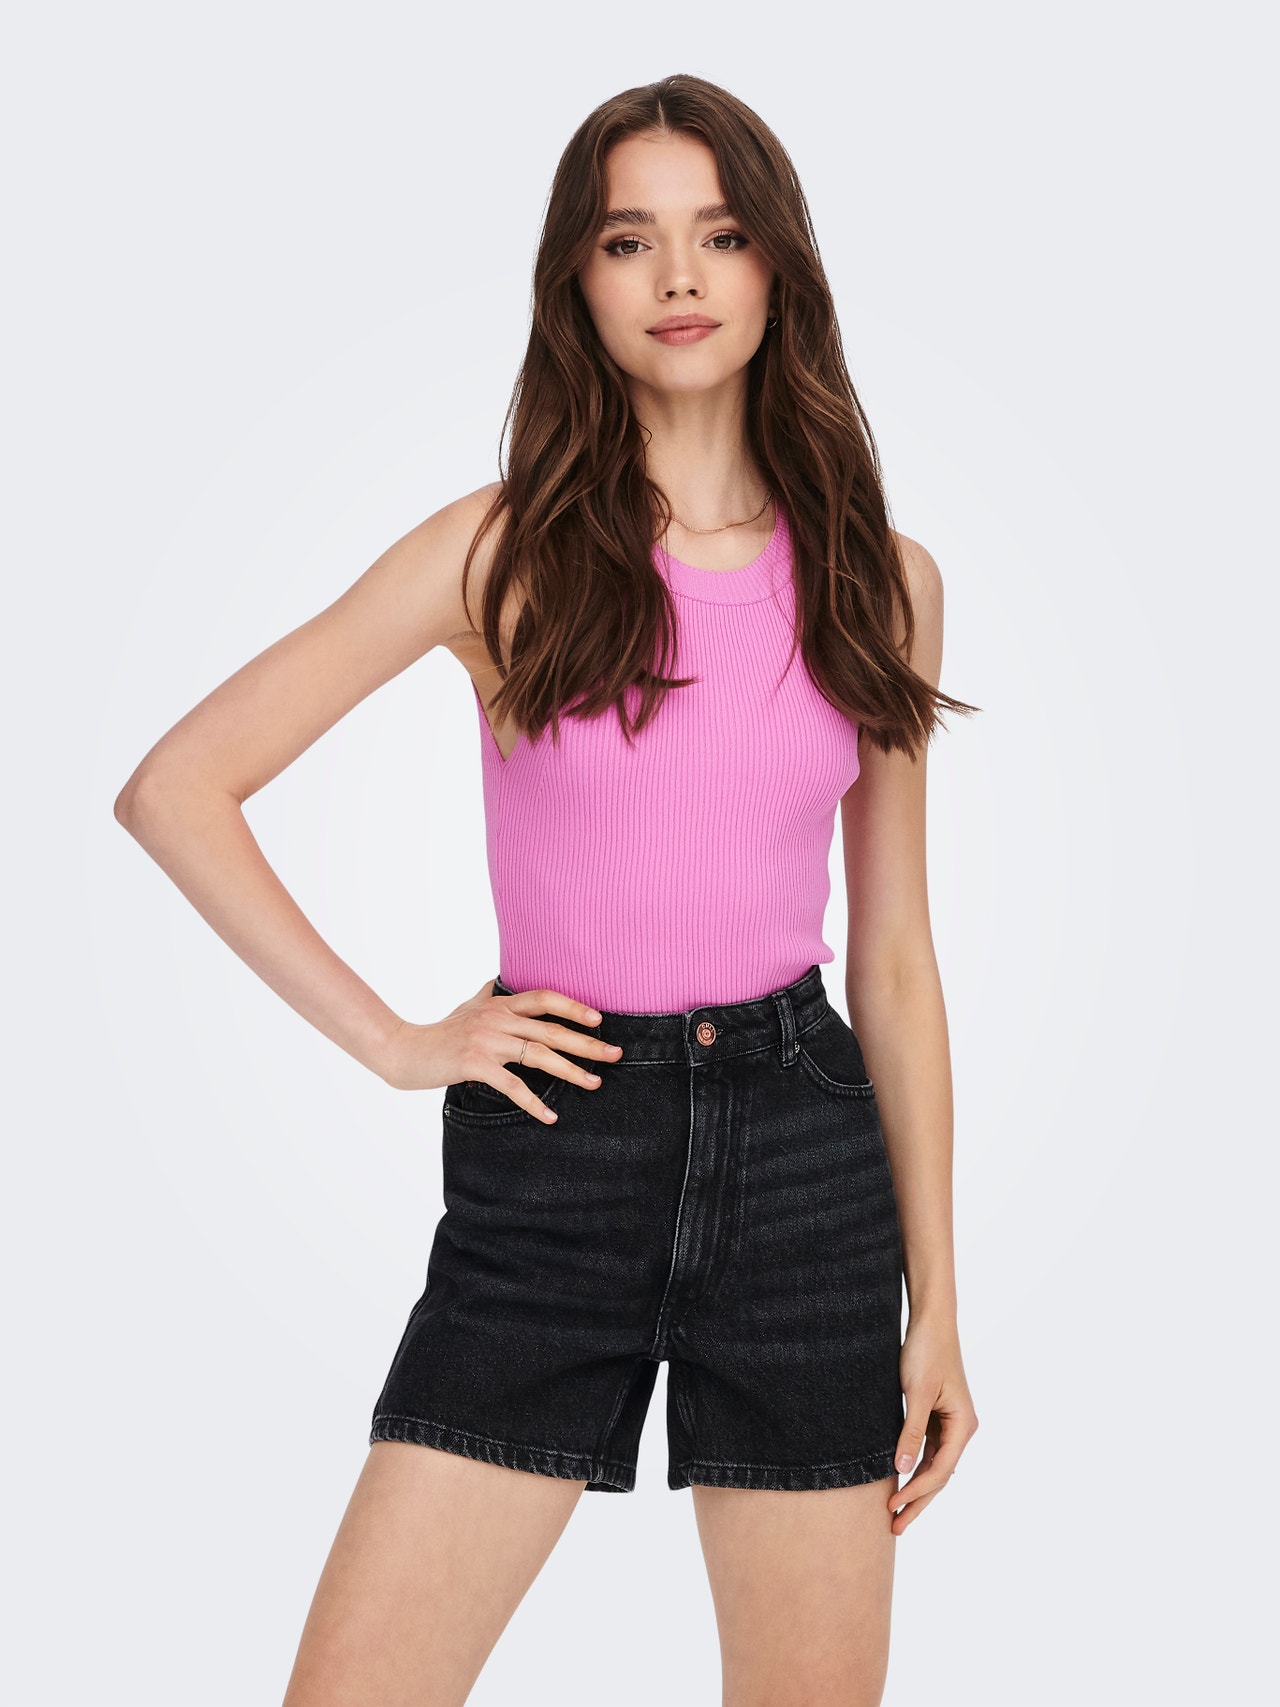 ONLY Dos nu Top en maille -Cotton Candy - 15277548